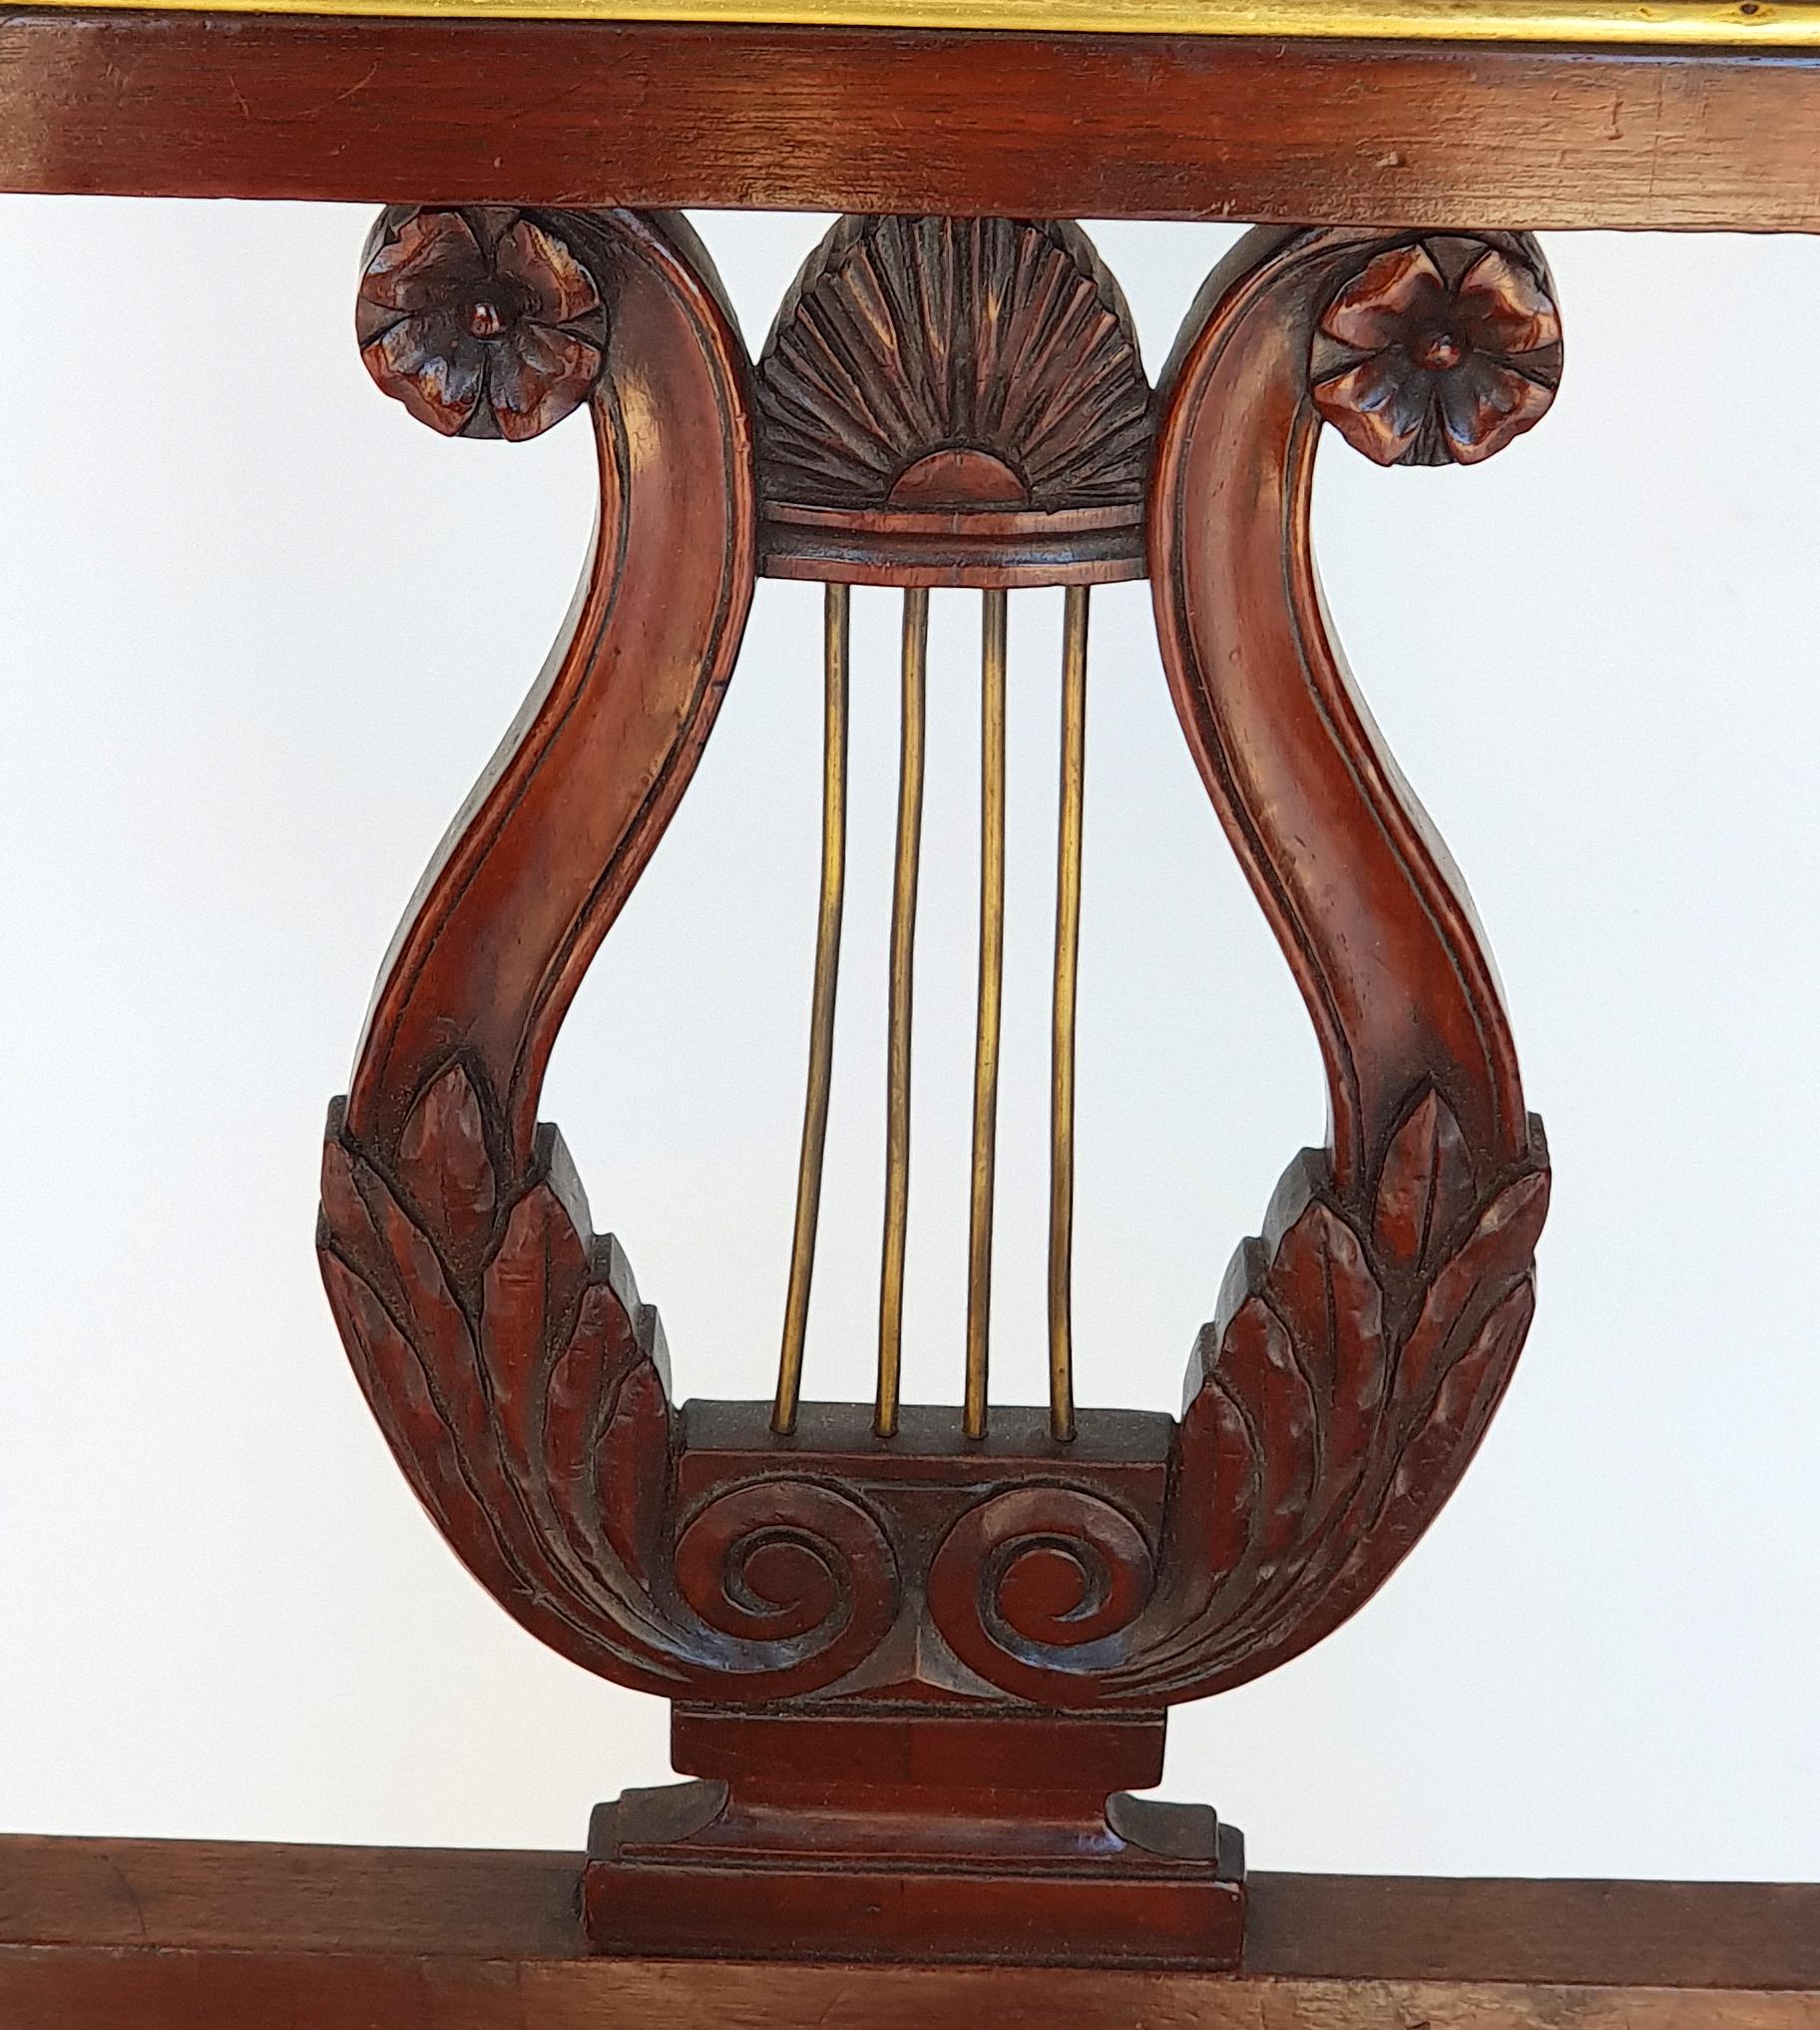 Set of six Biedermeier lyre chairs, Northern Germany, 1820s. Made of mahogany. Very good, original condition.

Conical square legs on the front, square legs on the back. Straight chair frame. Upholstery and upholstery are original. The upholstery